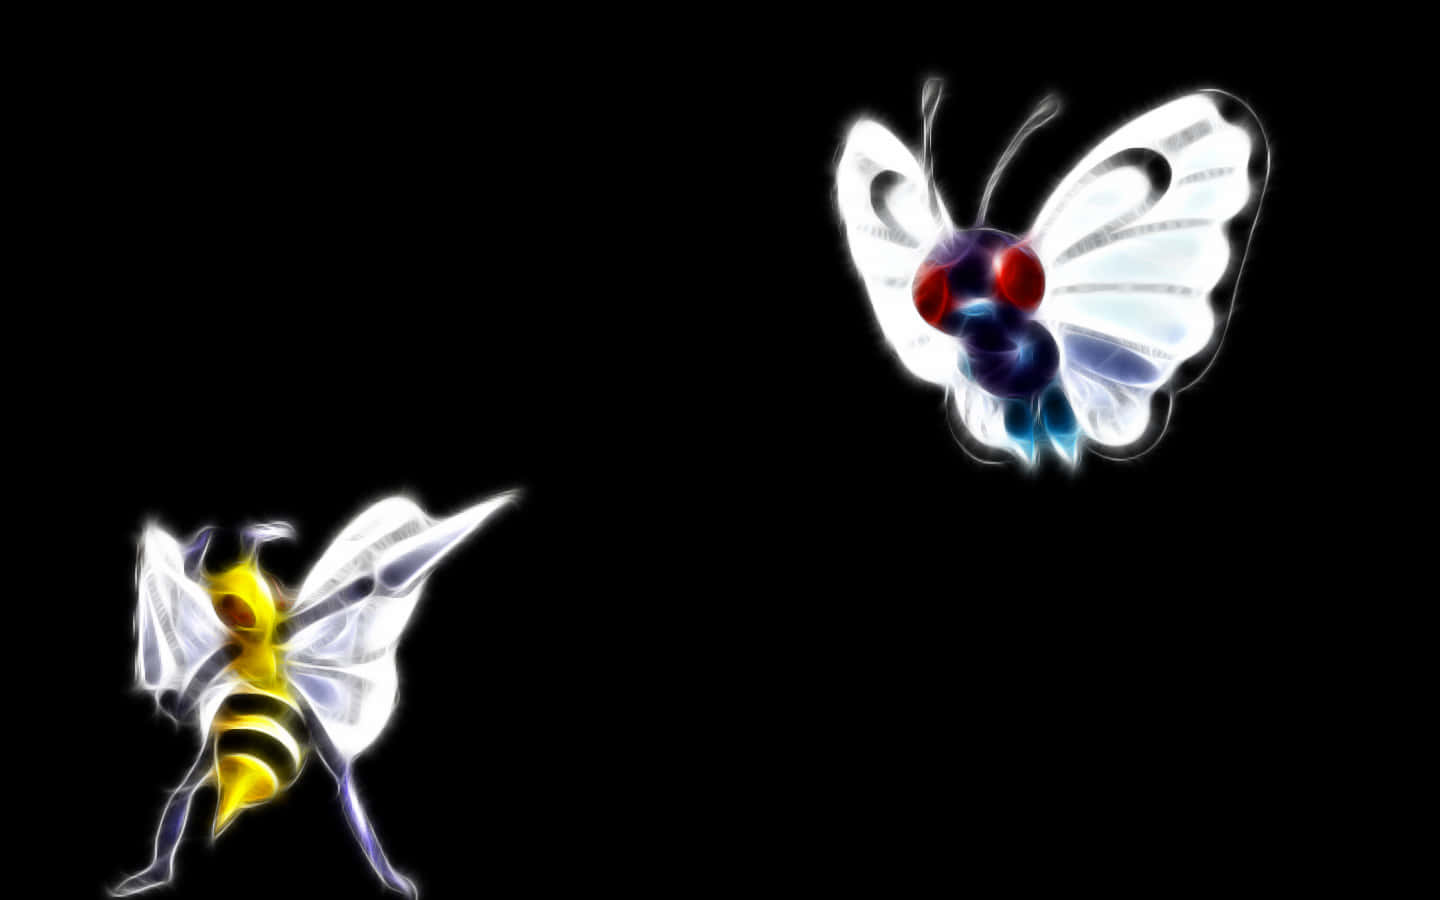 Glowing Beedrill And Butterfree Wallpaper